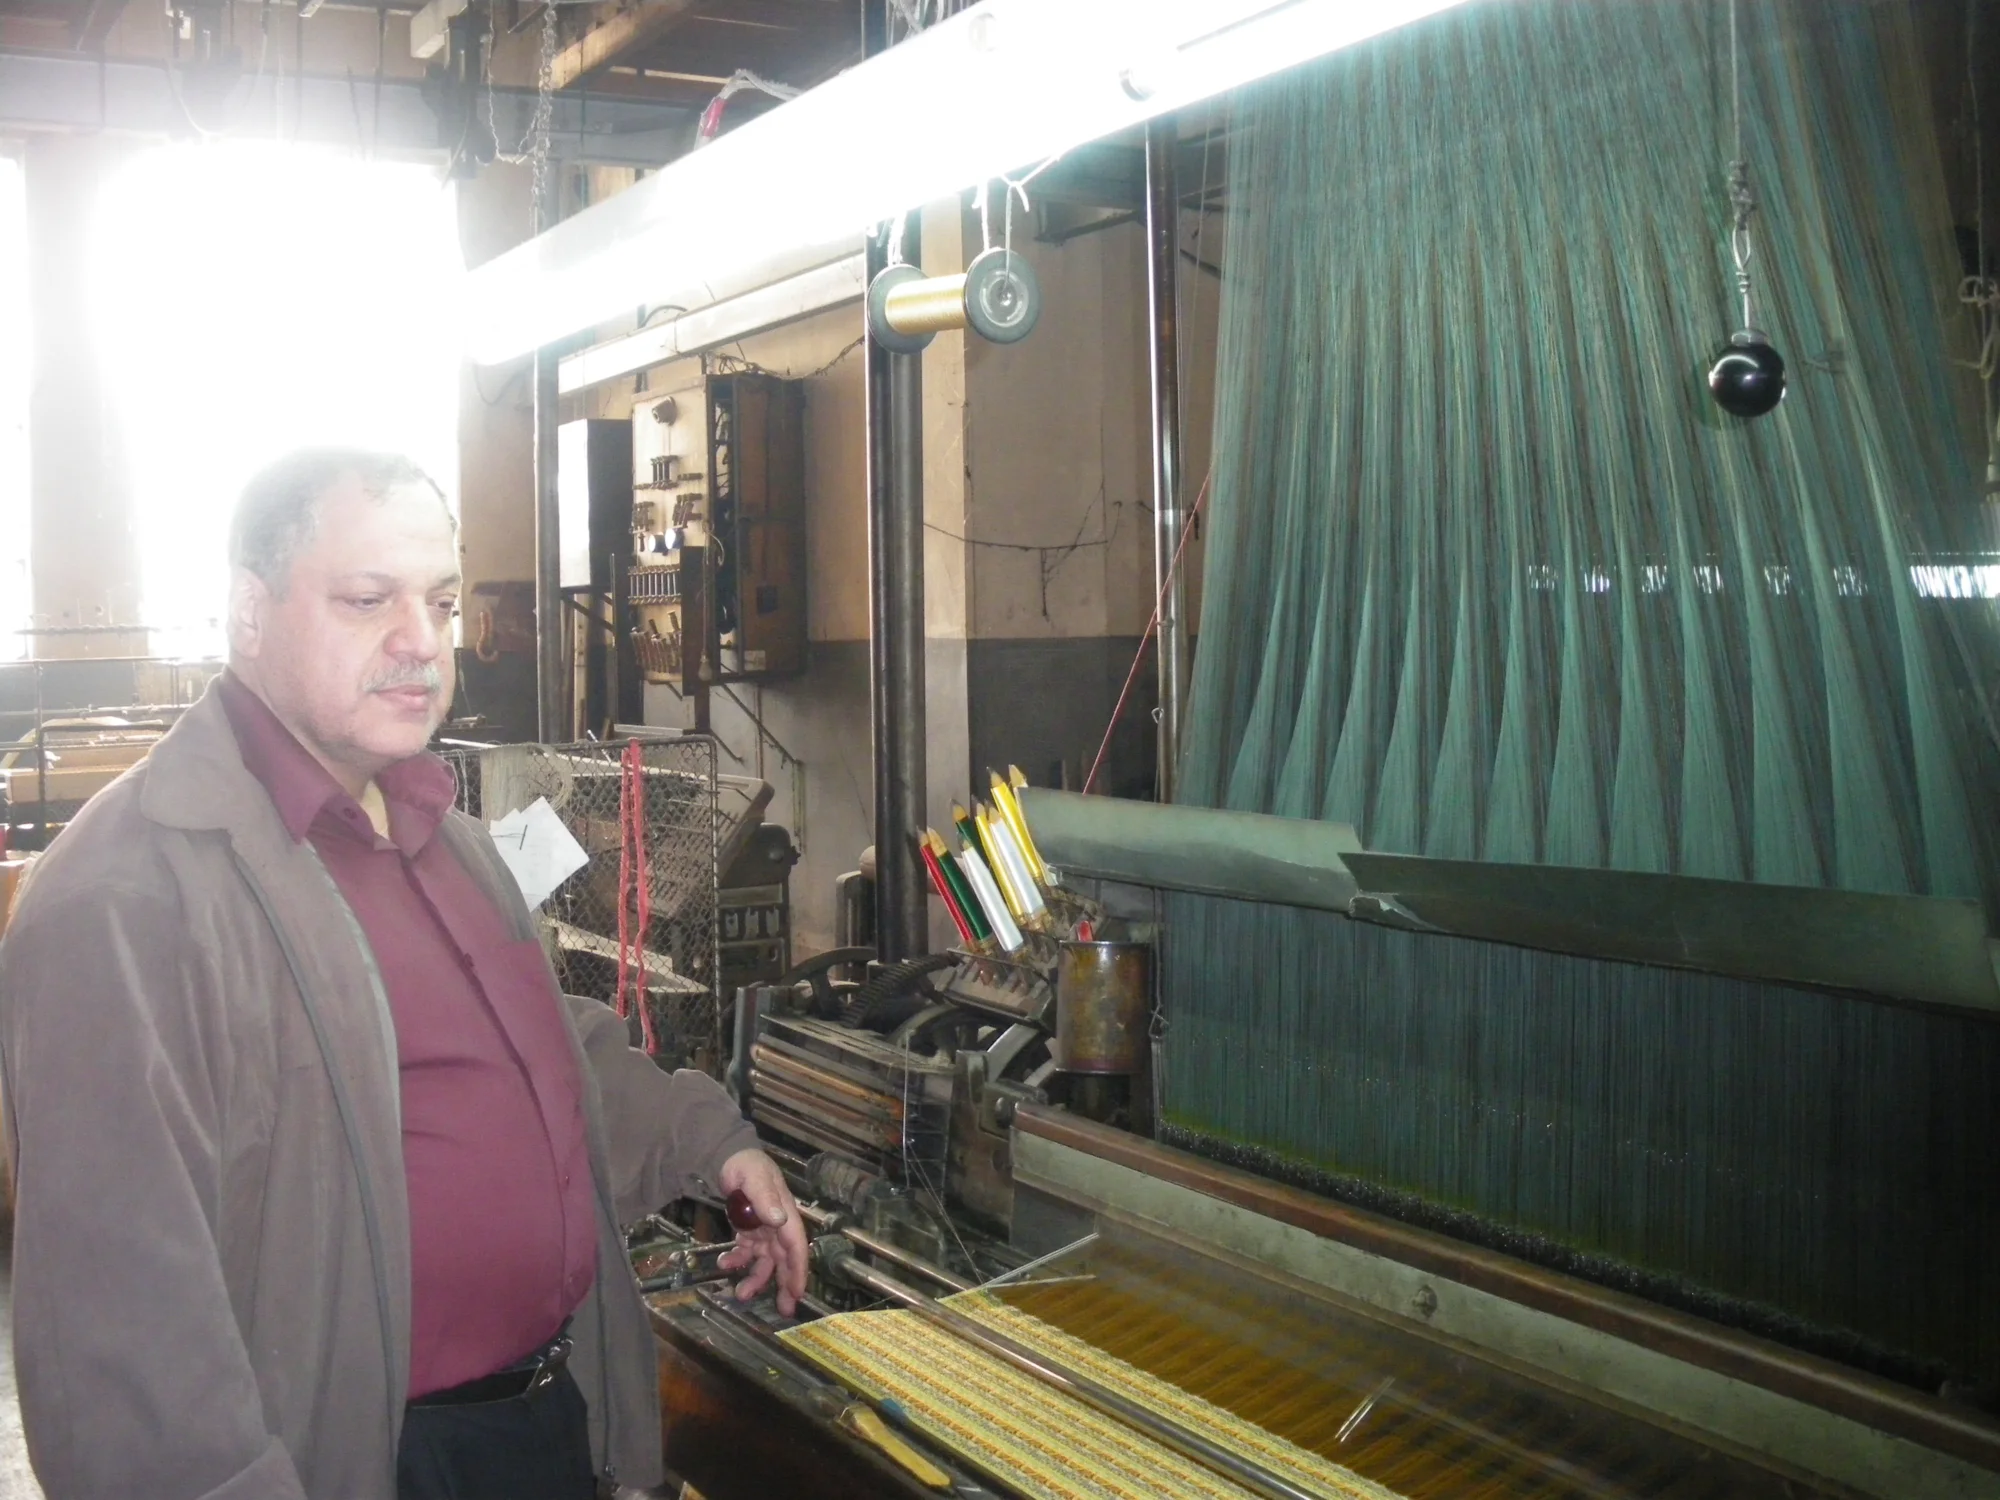 A mechanical loom in the textile factory of the Mezannar family